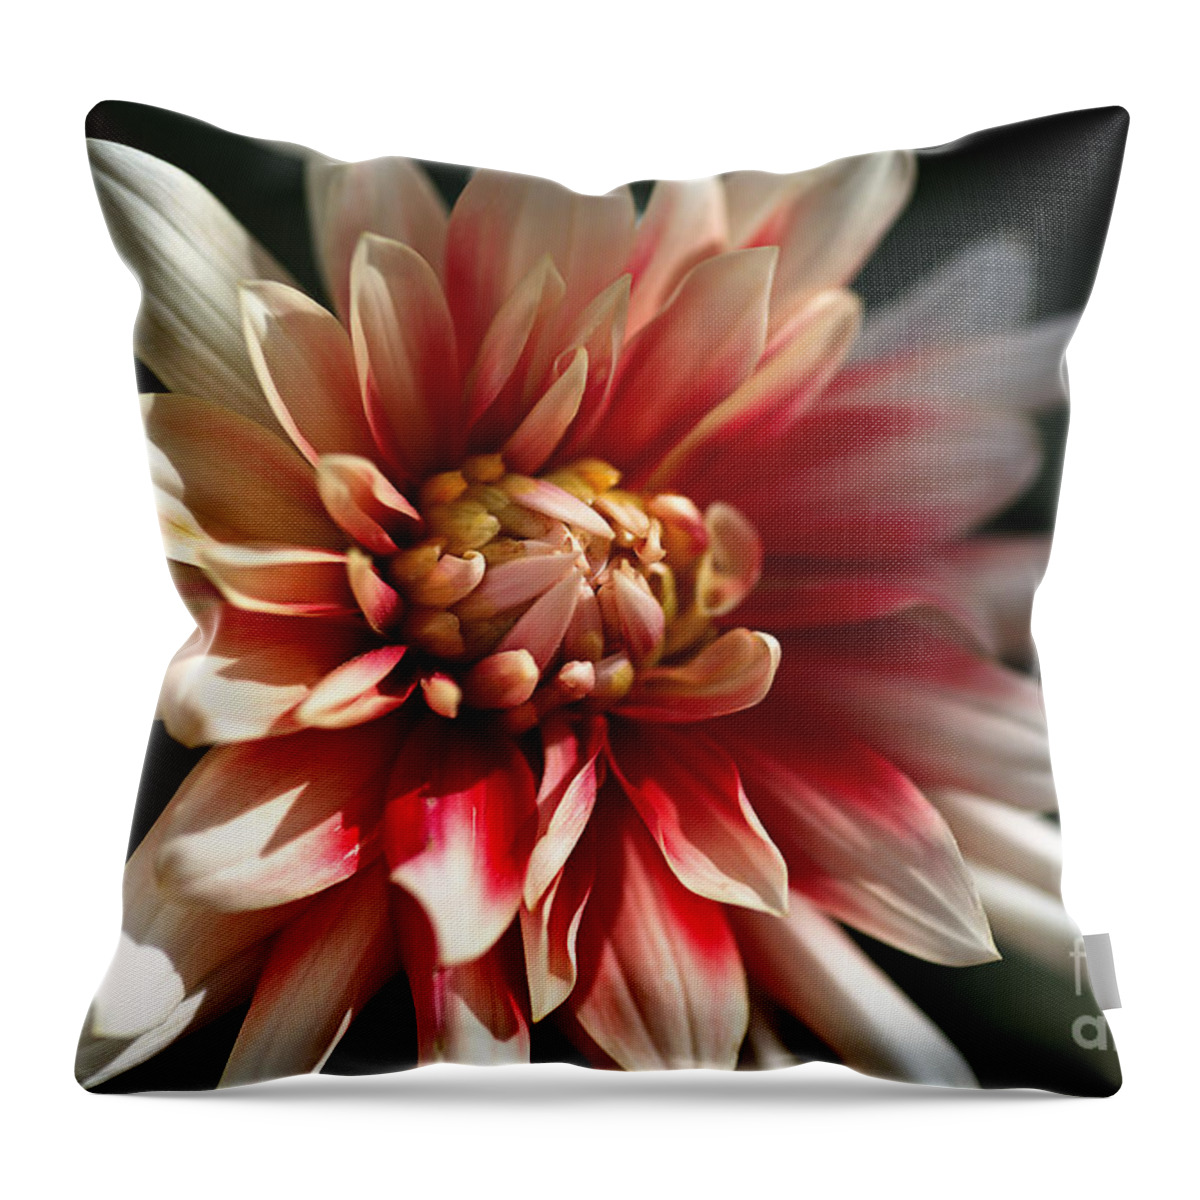 Fire And Ice Throw Pillow featuring the photograph Dahlia Warmth by Joy Watson